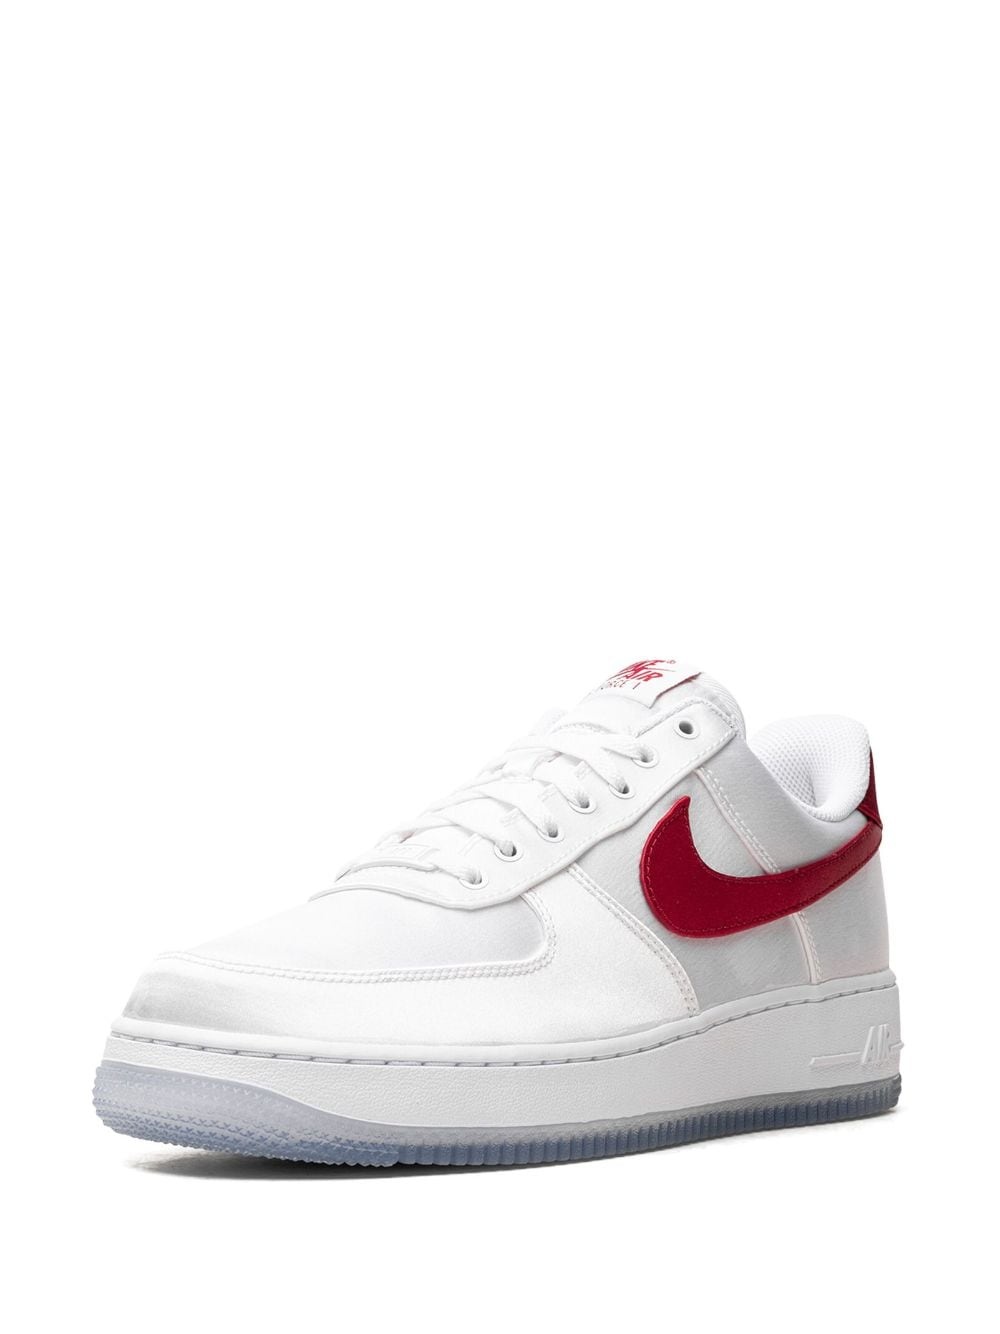 Air Force 1 Low '07 "Satin White/Varsity Red" sneakers - 3